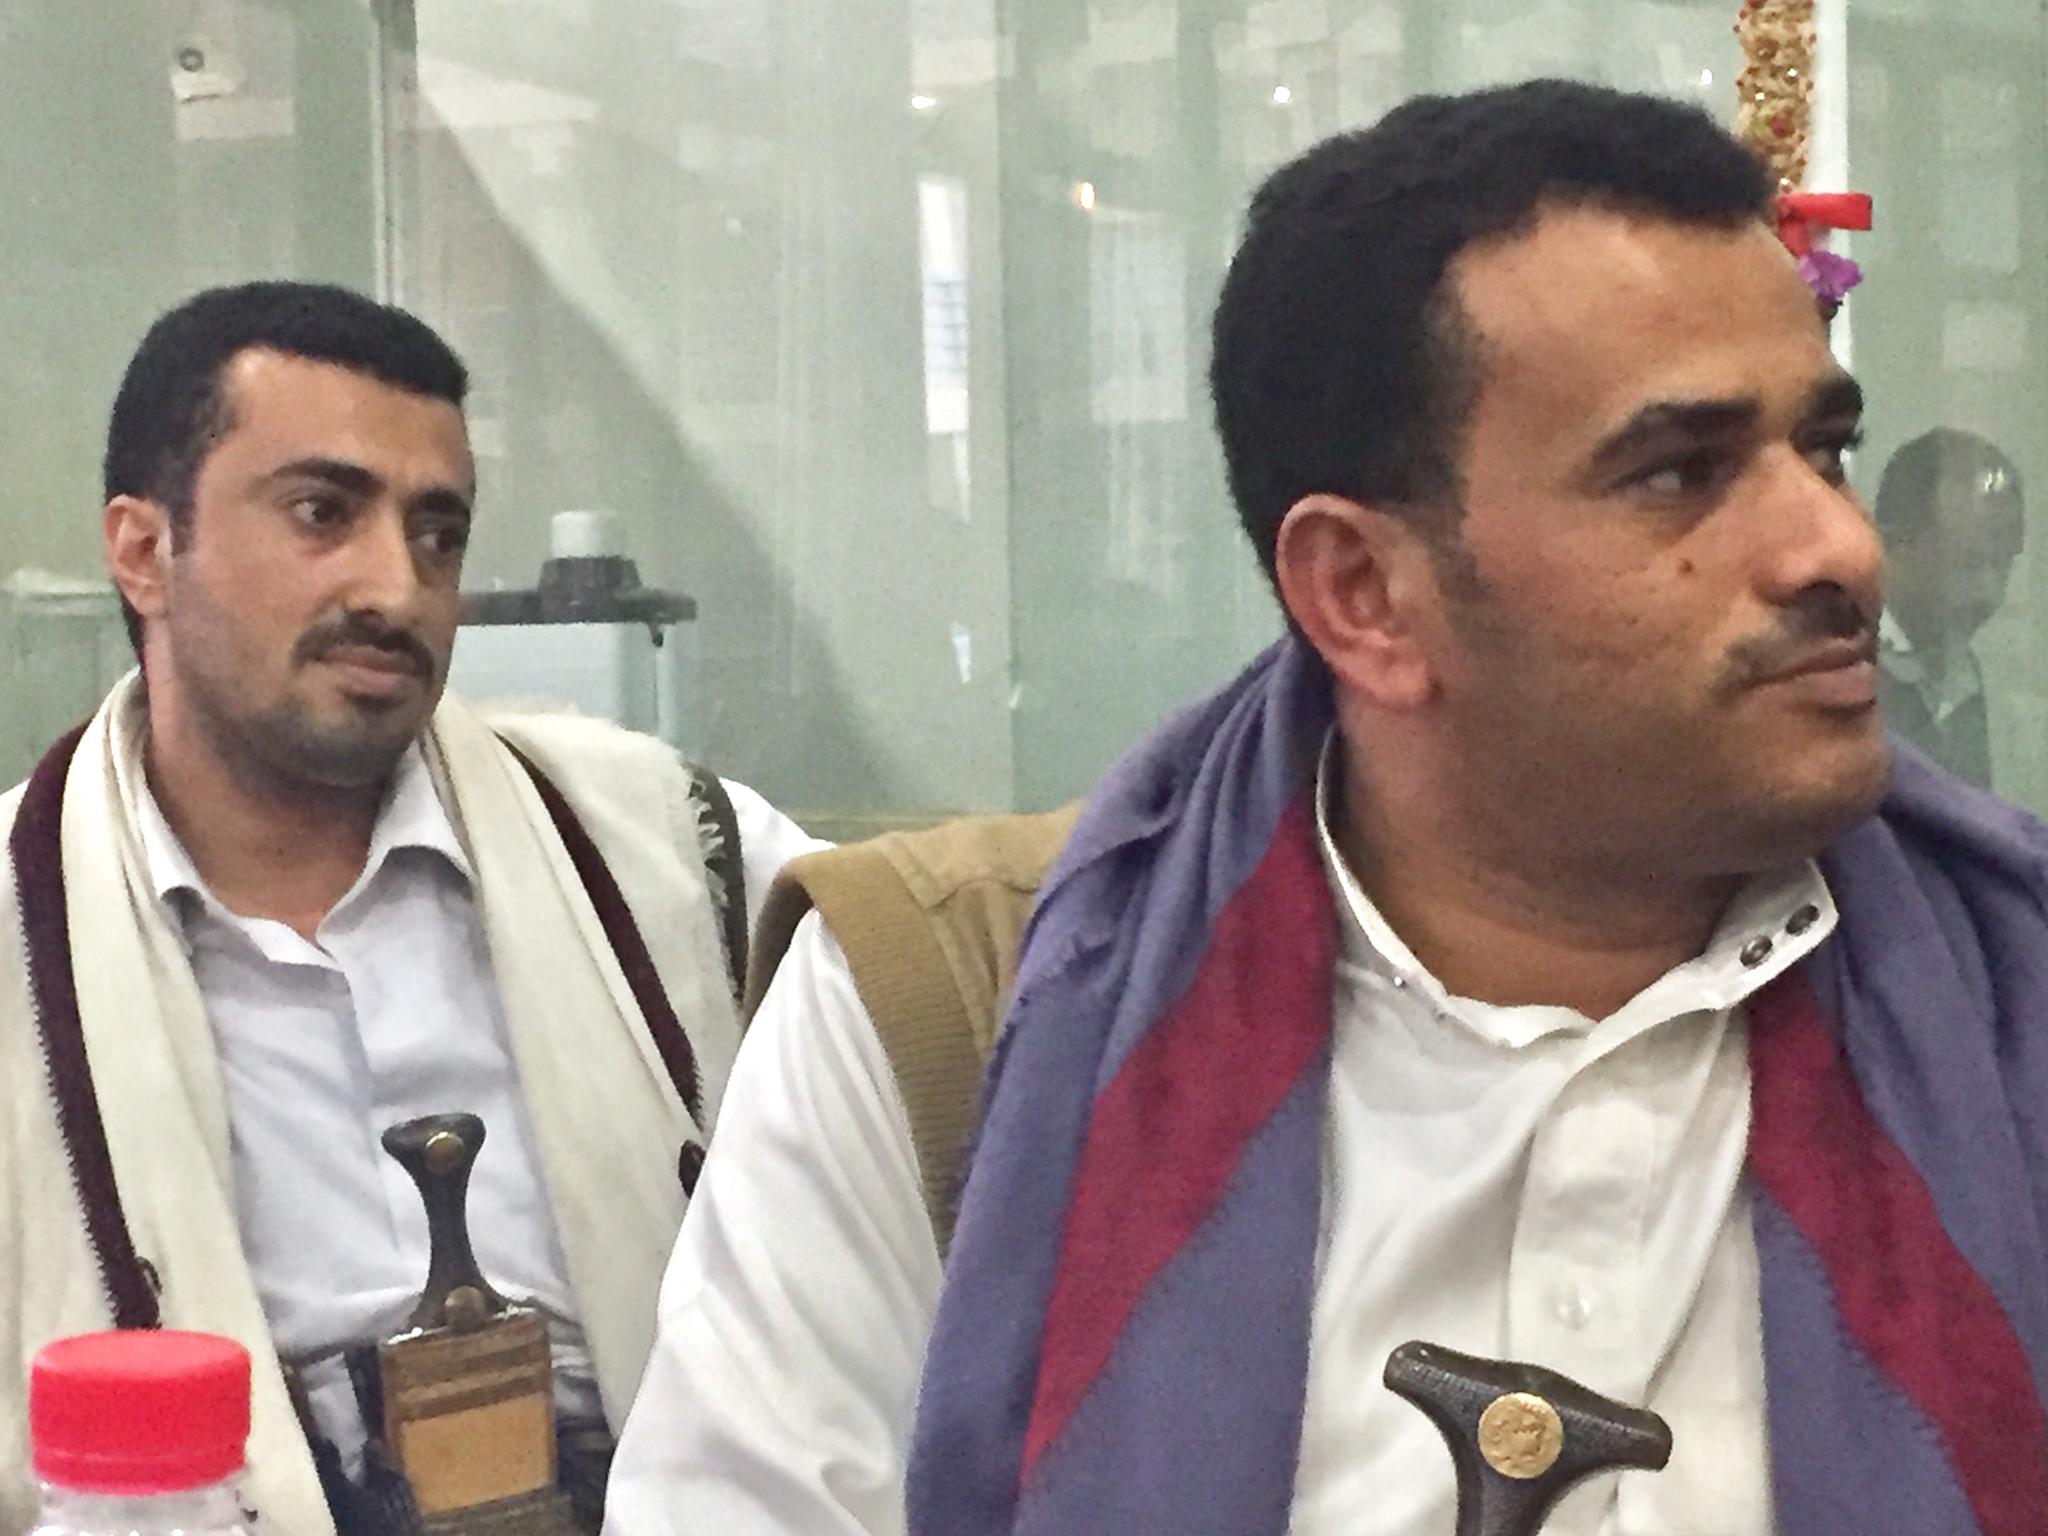 Khat dealers Madhi Ali Ahmed (L) and Bashir Samedi are two of the wealthiest men in Marib province (Bethan McKernan)